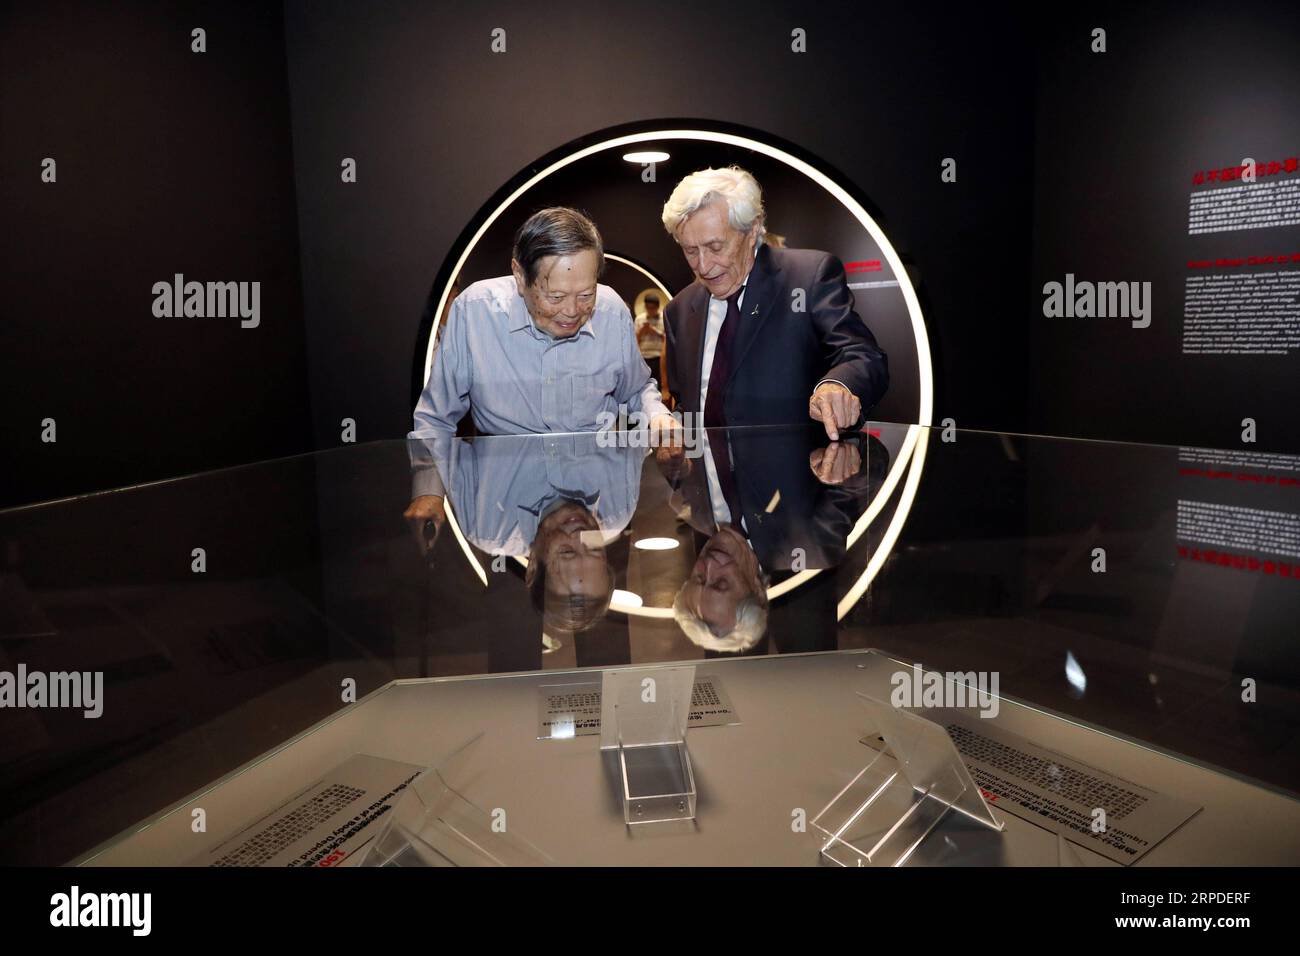 China, Einstein-Ausstellung in Shanghai (190802) -- SHANGHAI, Aug. 2, 2019 -- Nobel Laureate in Physics Yang Chen-ning (L) and former president of the Hebrew University of Jerusalem Hanoch Gutfreund view exhibits at the World Expo Museum in east China s Shanghai, Aug. 1, 2019. An exhibition of Albert Einstein opens to public here on Aug. 2, showcasing over 100 exhibits related to the brilliant scientist. This year marks the 140 anniversary of the scientist s birth. ) CHINA-SHANGHAI-ALBERT EINSTEIN-EXHIBITION (CN) LiuxYing PUBLICATIONxNOTxINxCHN Stock Photo